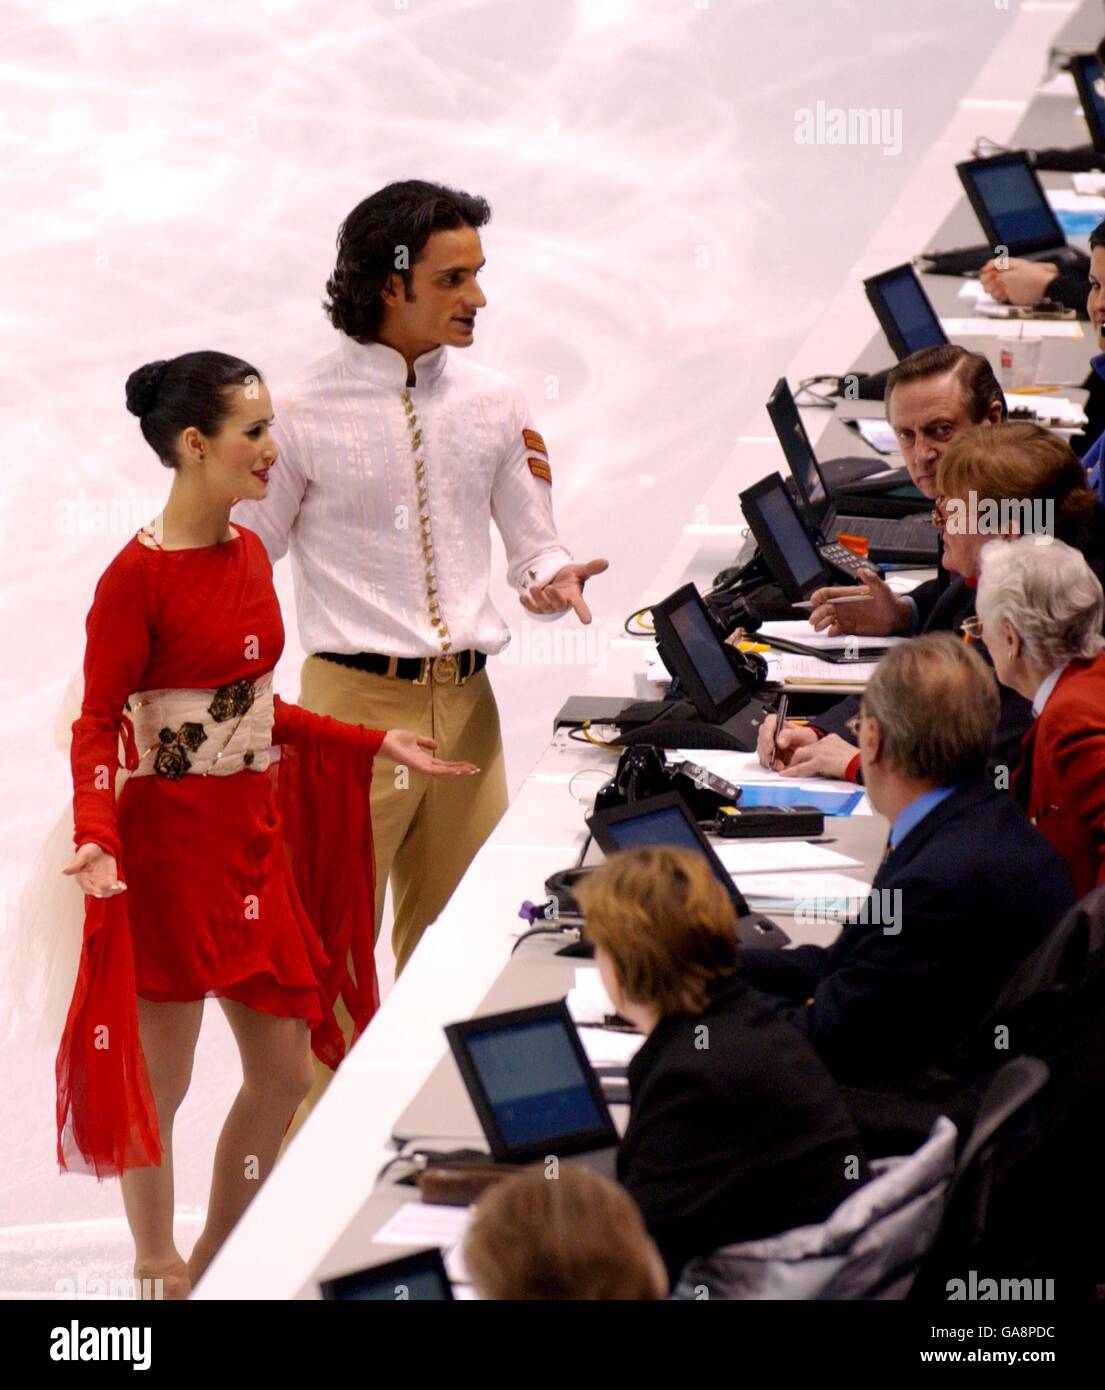 Canada's Marie-France Dubreuil and her partner Patrice Lauzon during their free dance routine Stock Photo